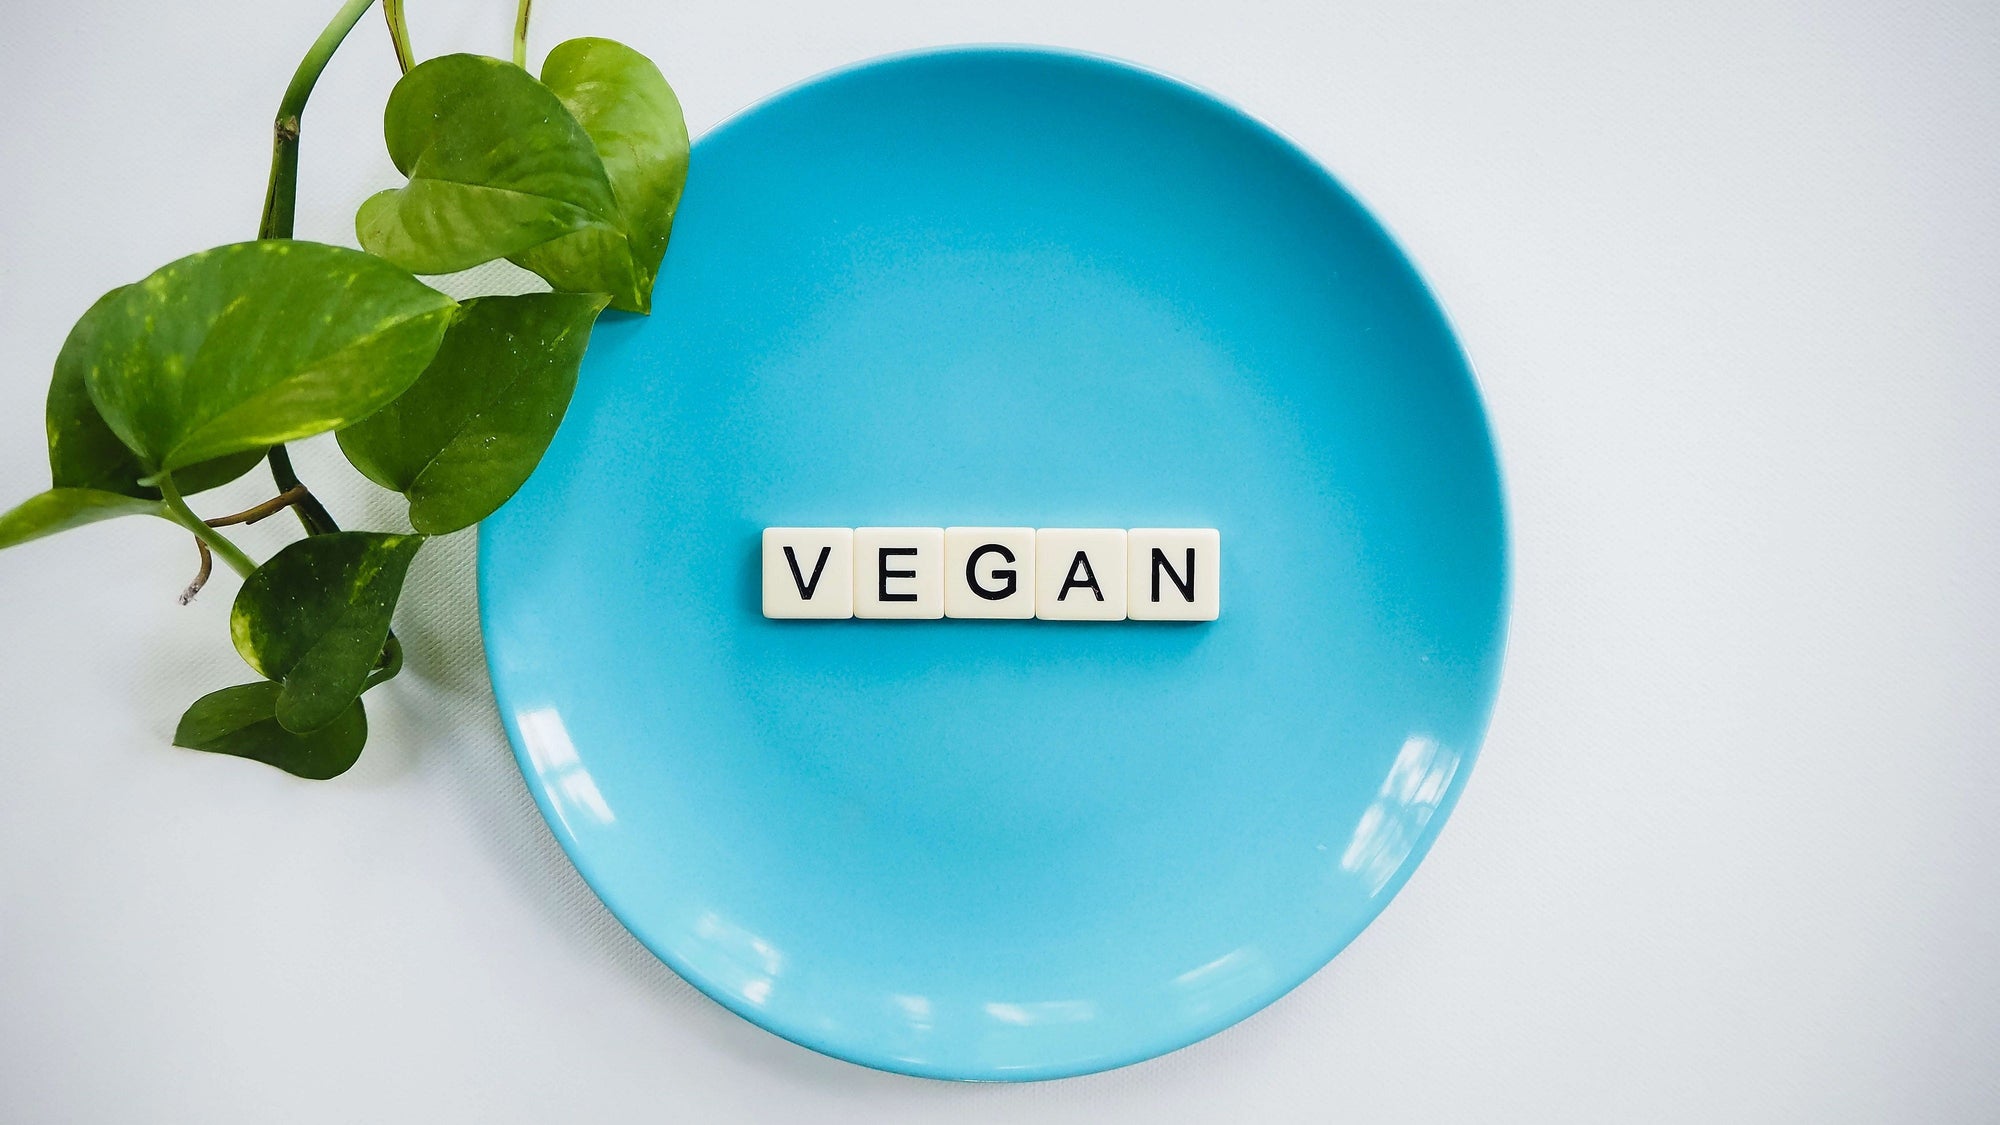 All About Veganuary